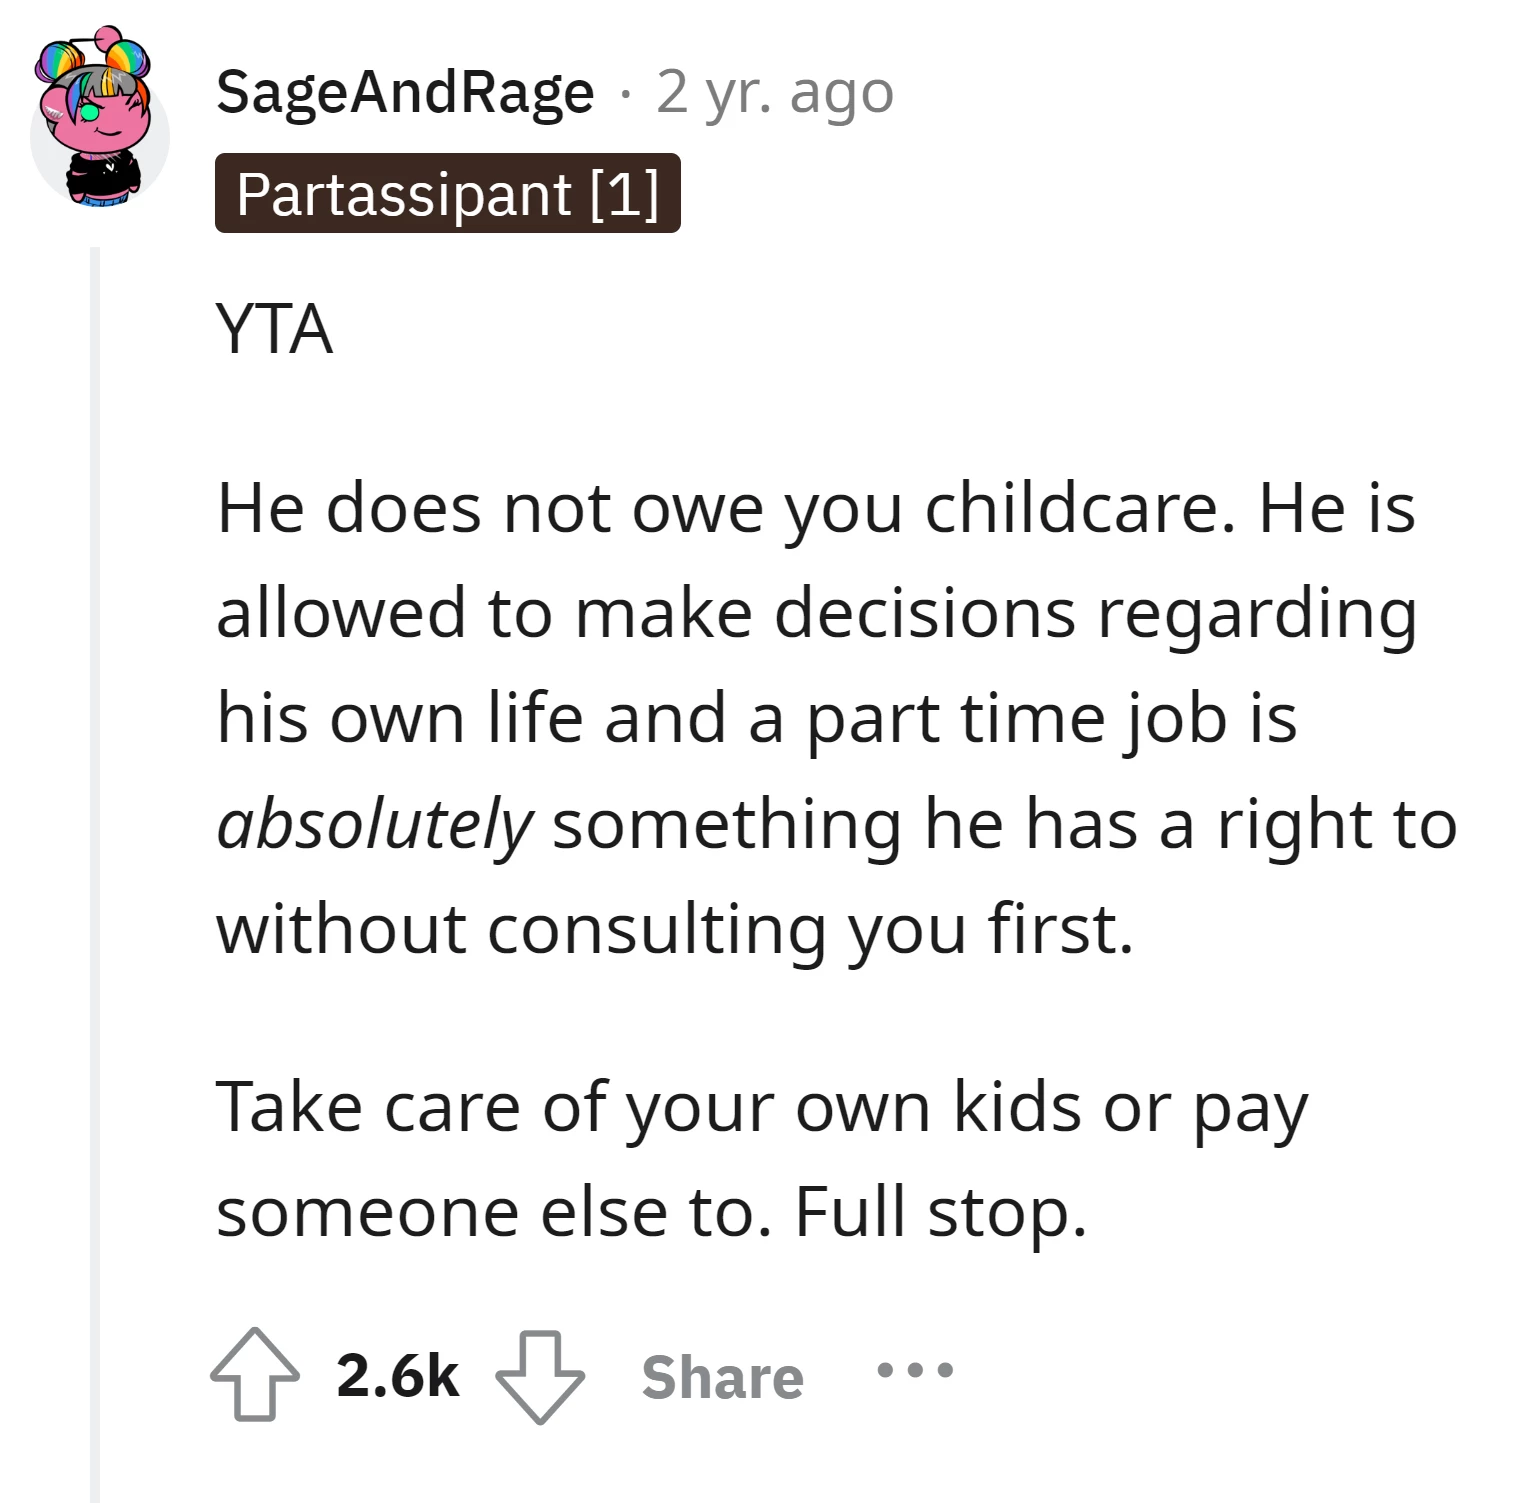 The OP's son is not obligated to provide childcare